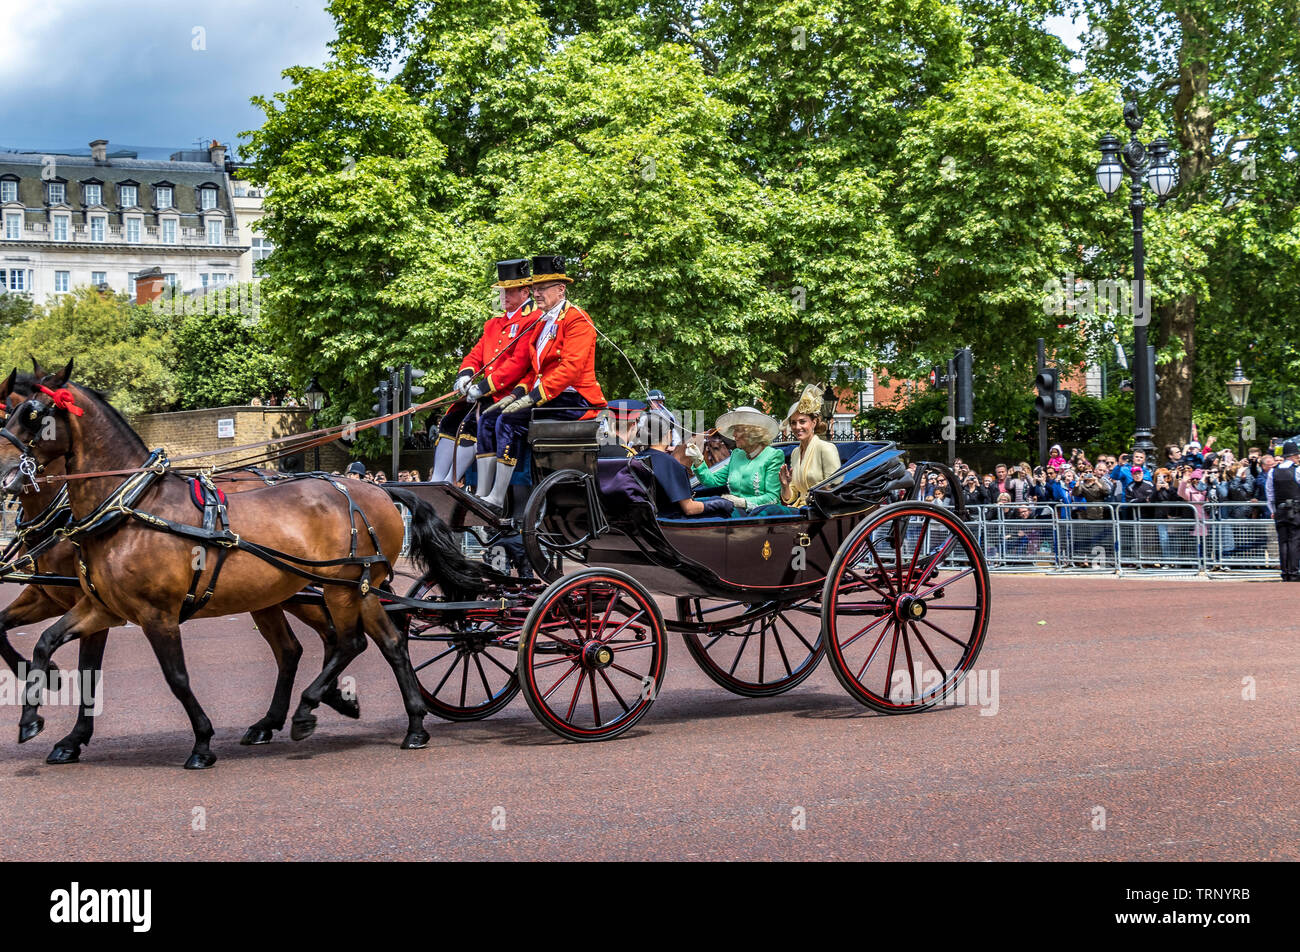 The Duchess Of Cambridge riding in a carriage with The Duchess Of Cornwall and The Duke and Duchess Of Sussex at Trooping The Colour, London, UK, 2019 Stock Photo